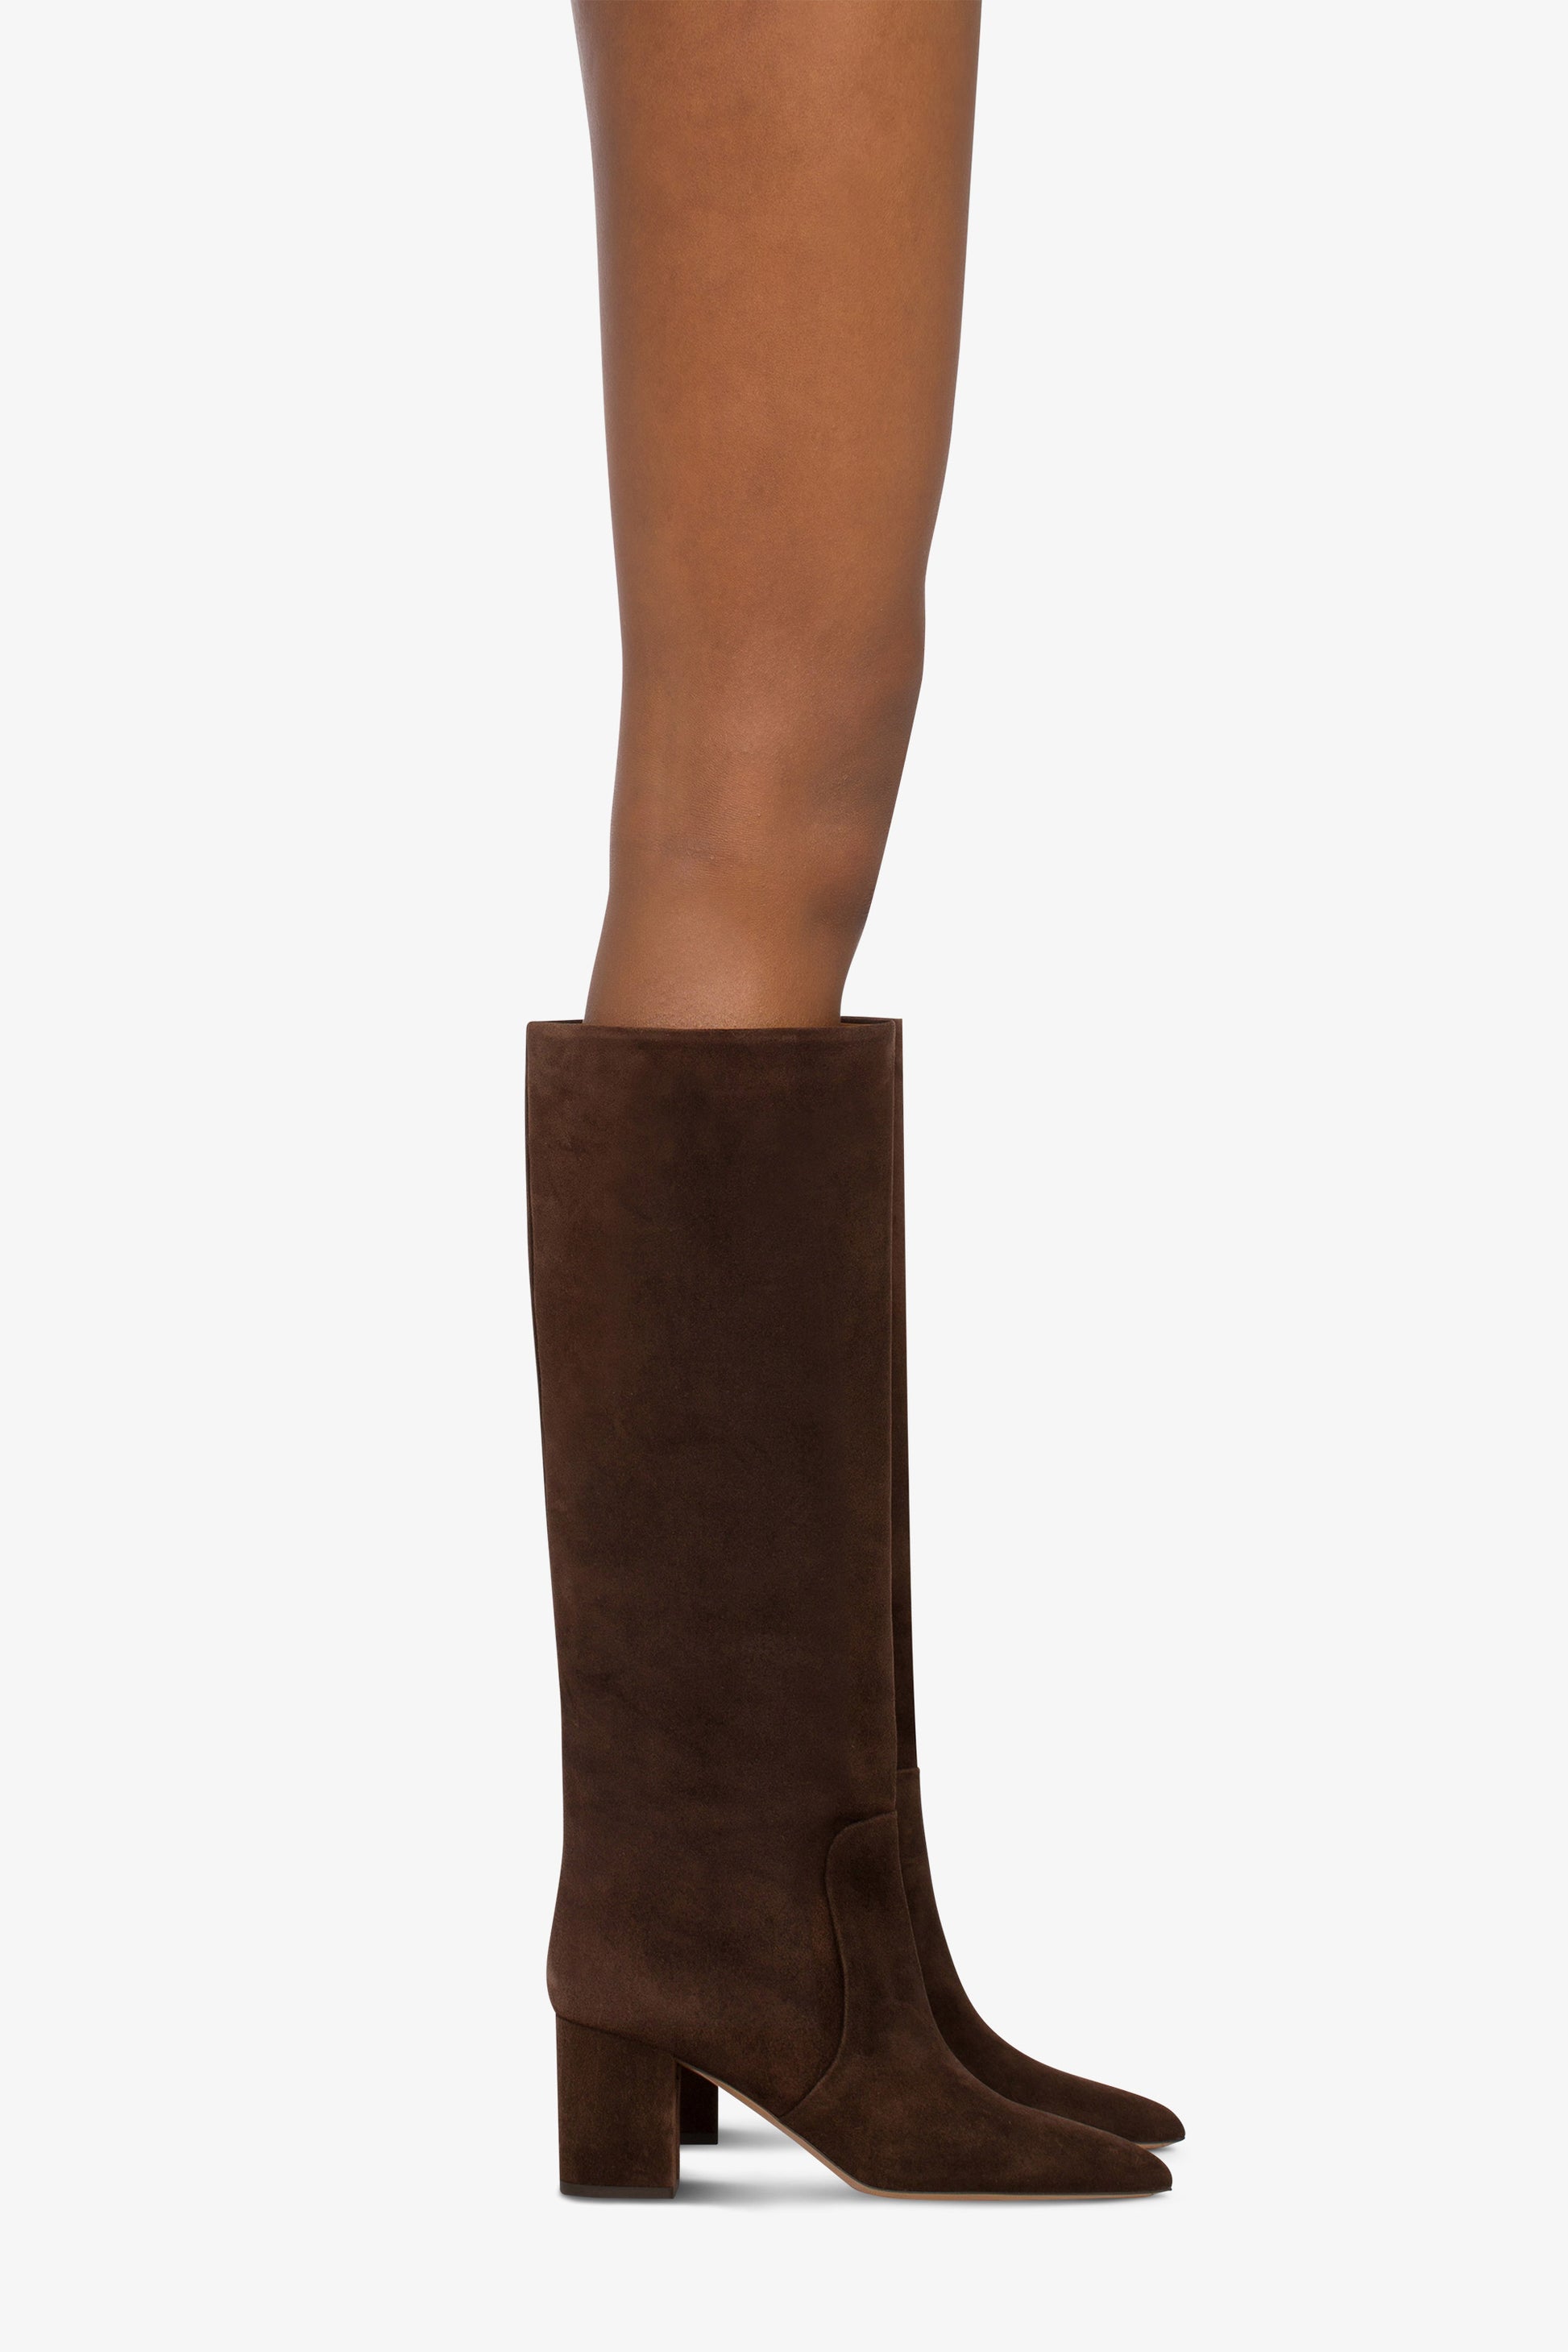 Knee-high boots in soft pepper suede leather - Product worn